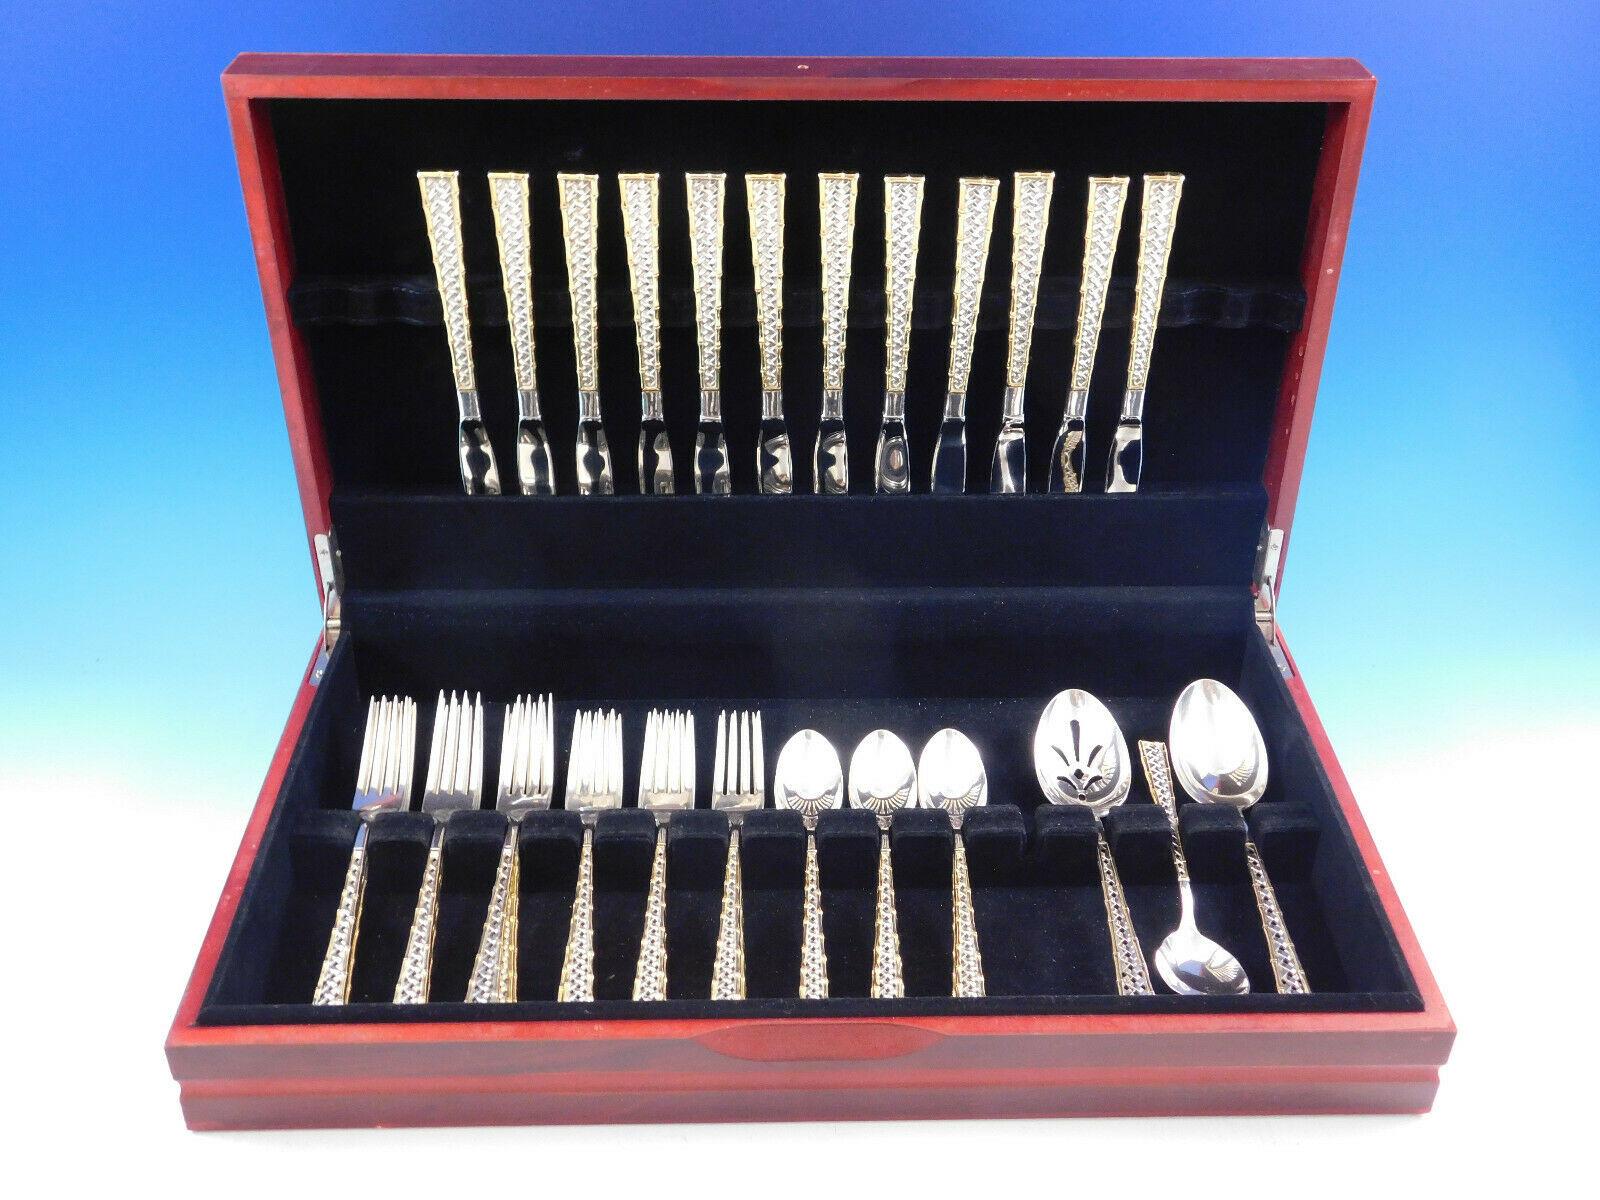 Golden Tradewinds by International sterling silver flatware set - 51 pieces. This pattern features a unique basket weave design and bamboo border with gold accent. This set includes:

12 Knives, 8 3/4